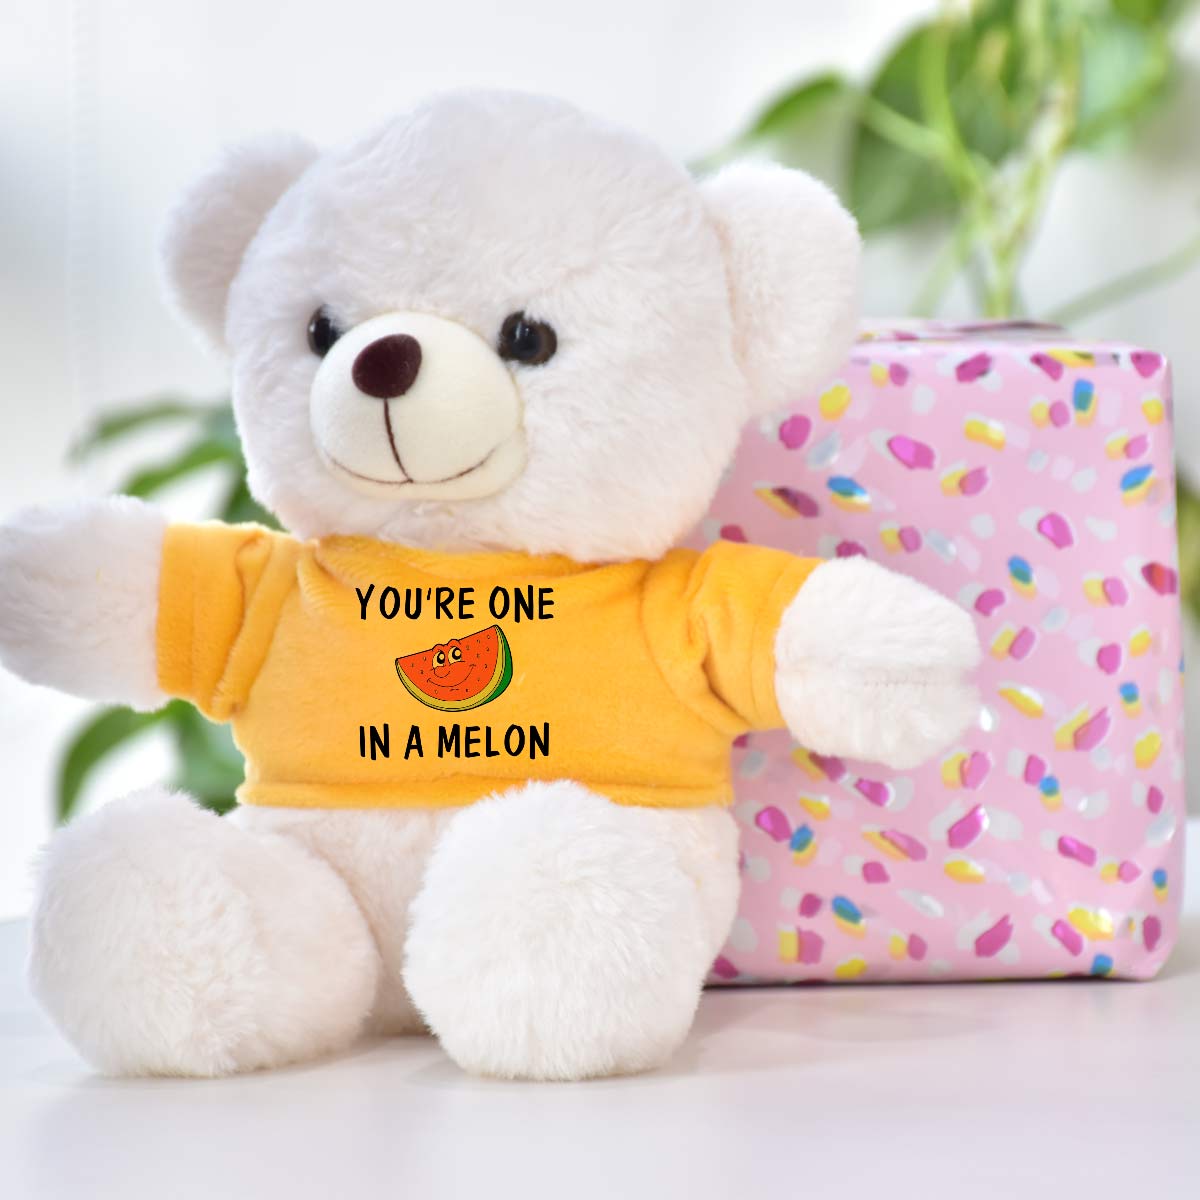 You are one in Melon T-Shirt Teddy-1